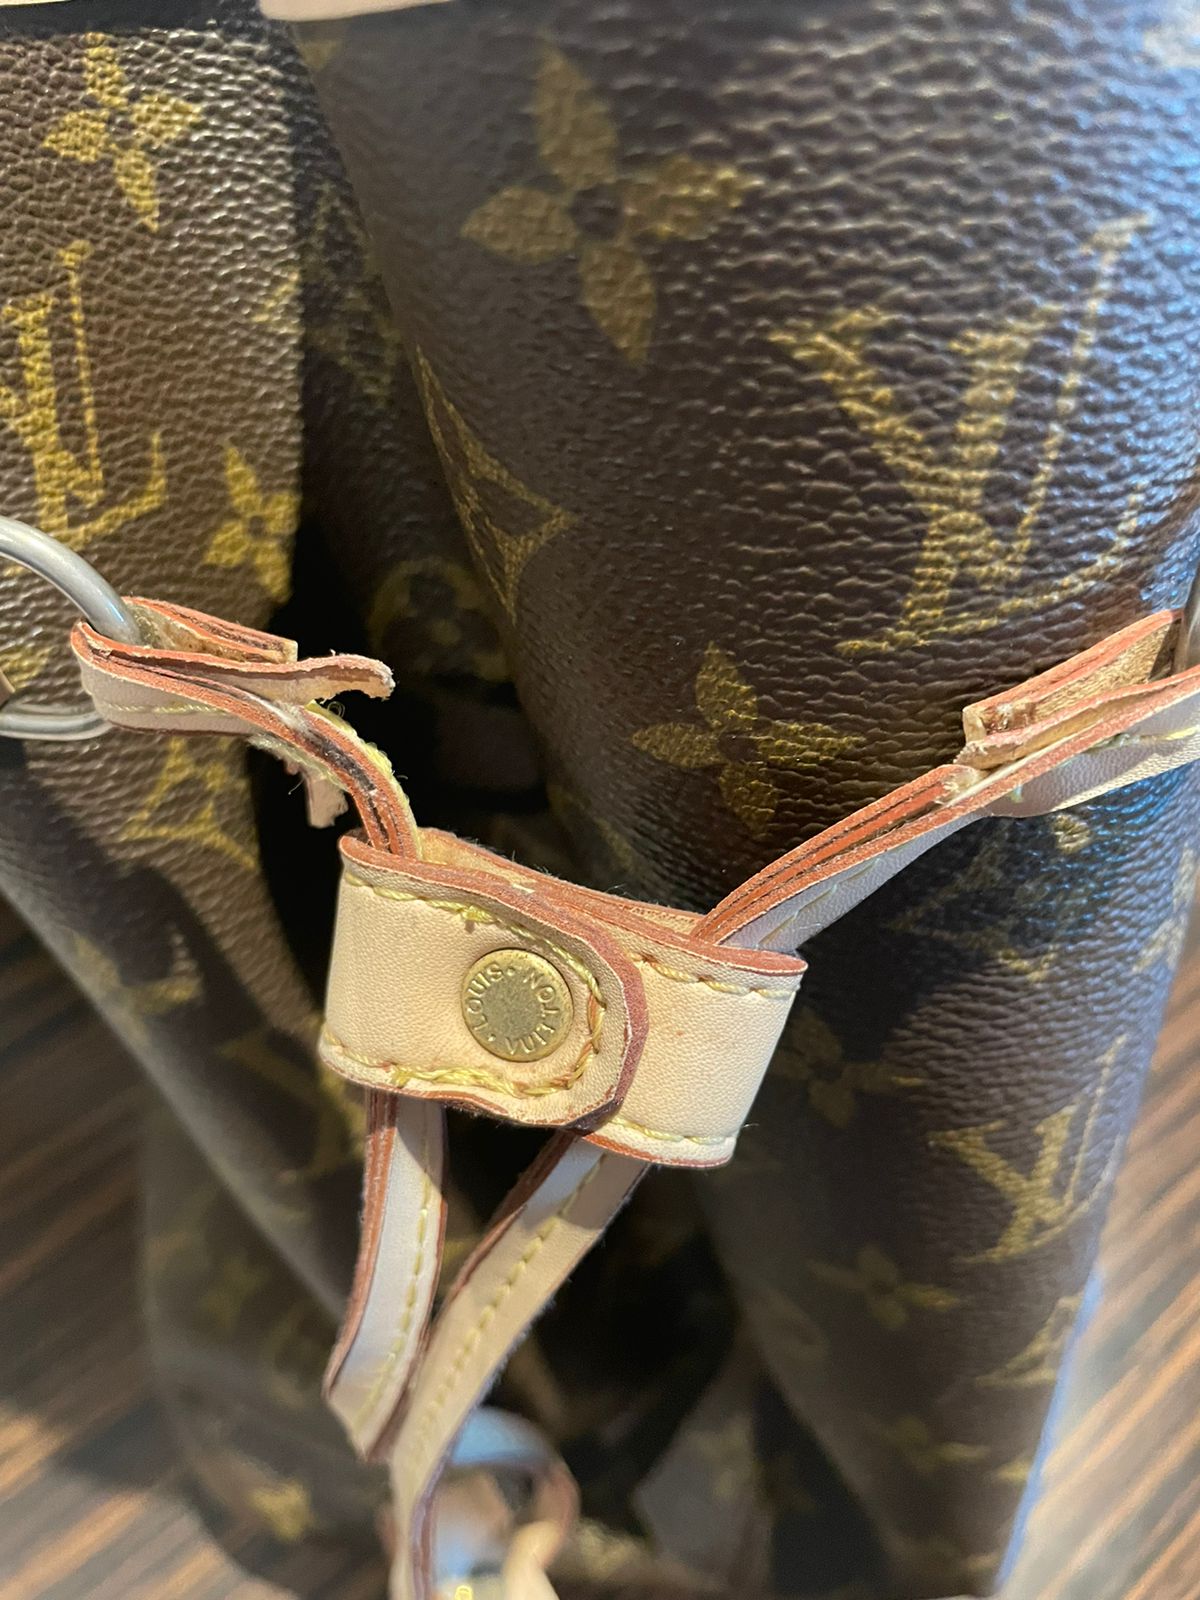 Leather Bag Handle Replacement: Louis Vuitton Neverfull 